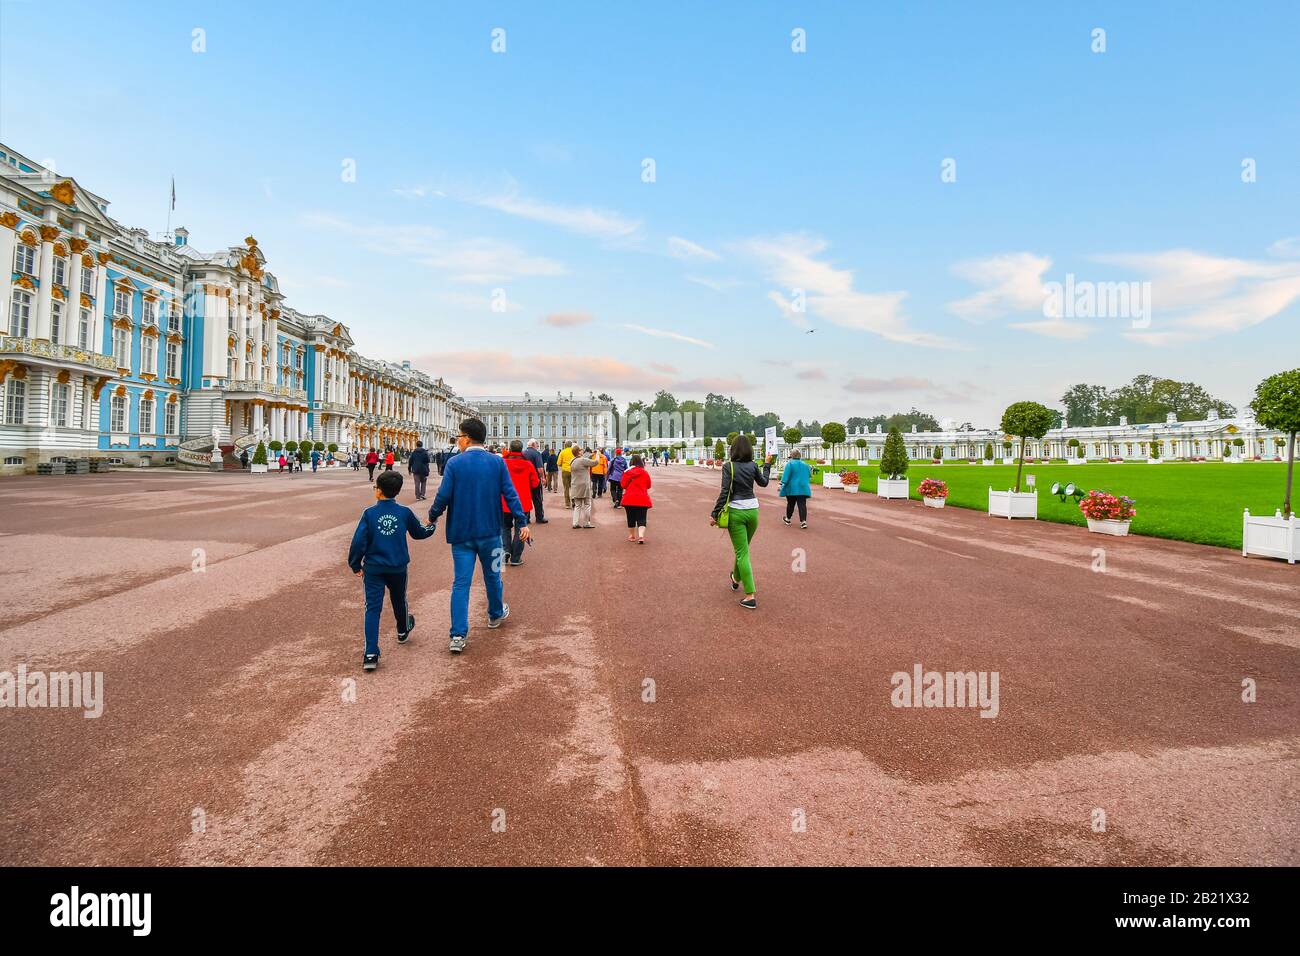 Tourists walk across the large promenade in between Catherine Palace and Gardens in Tsarskoye Selo, near St. Petersburg, Russia. Stock Photo